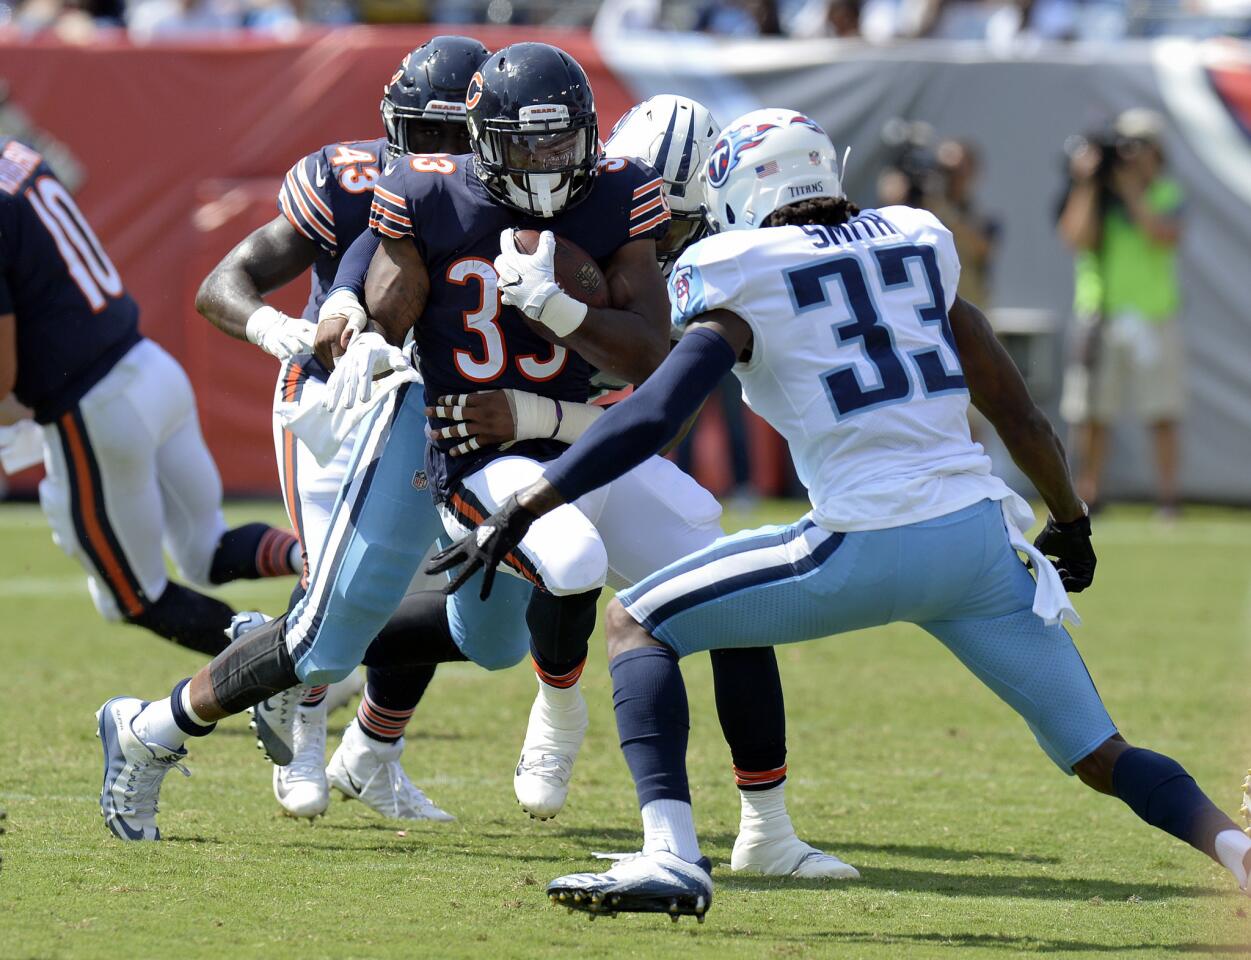 Bears running back Jeremy Langford faces Titans cornerback Tye Smith in the second half of an exhibition on Sunday, Aug. 27, 2017, in Nashville, Tenn.